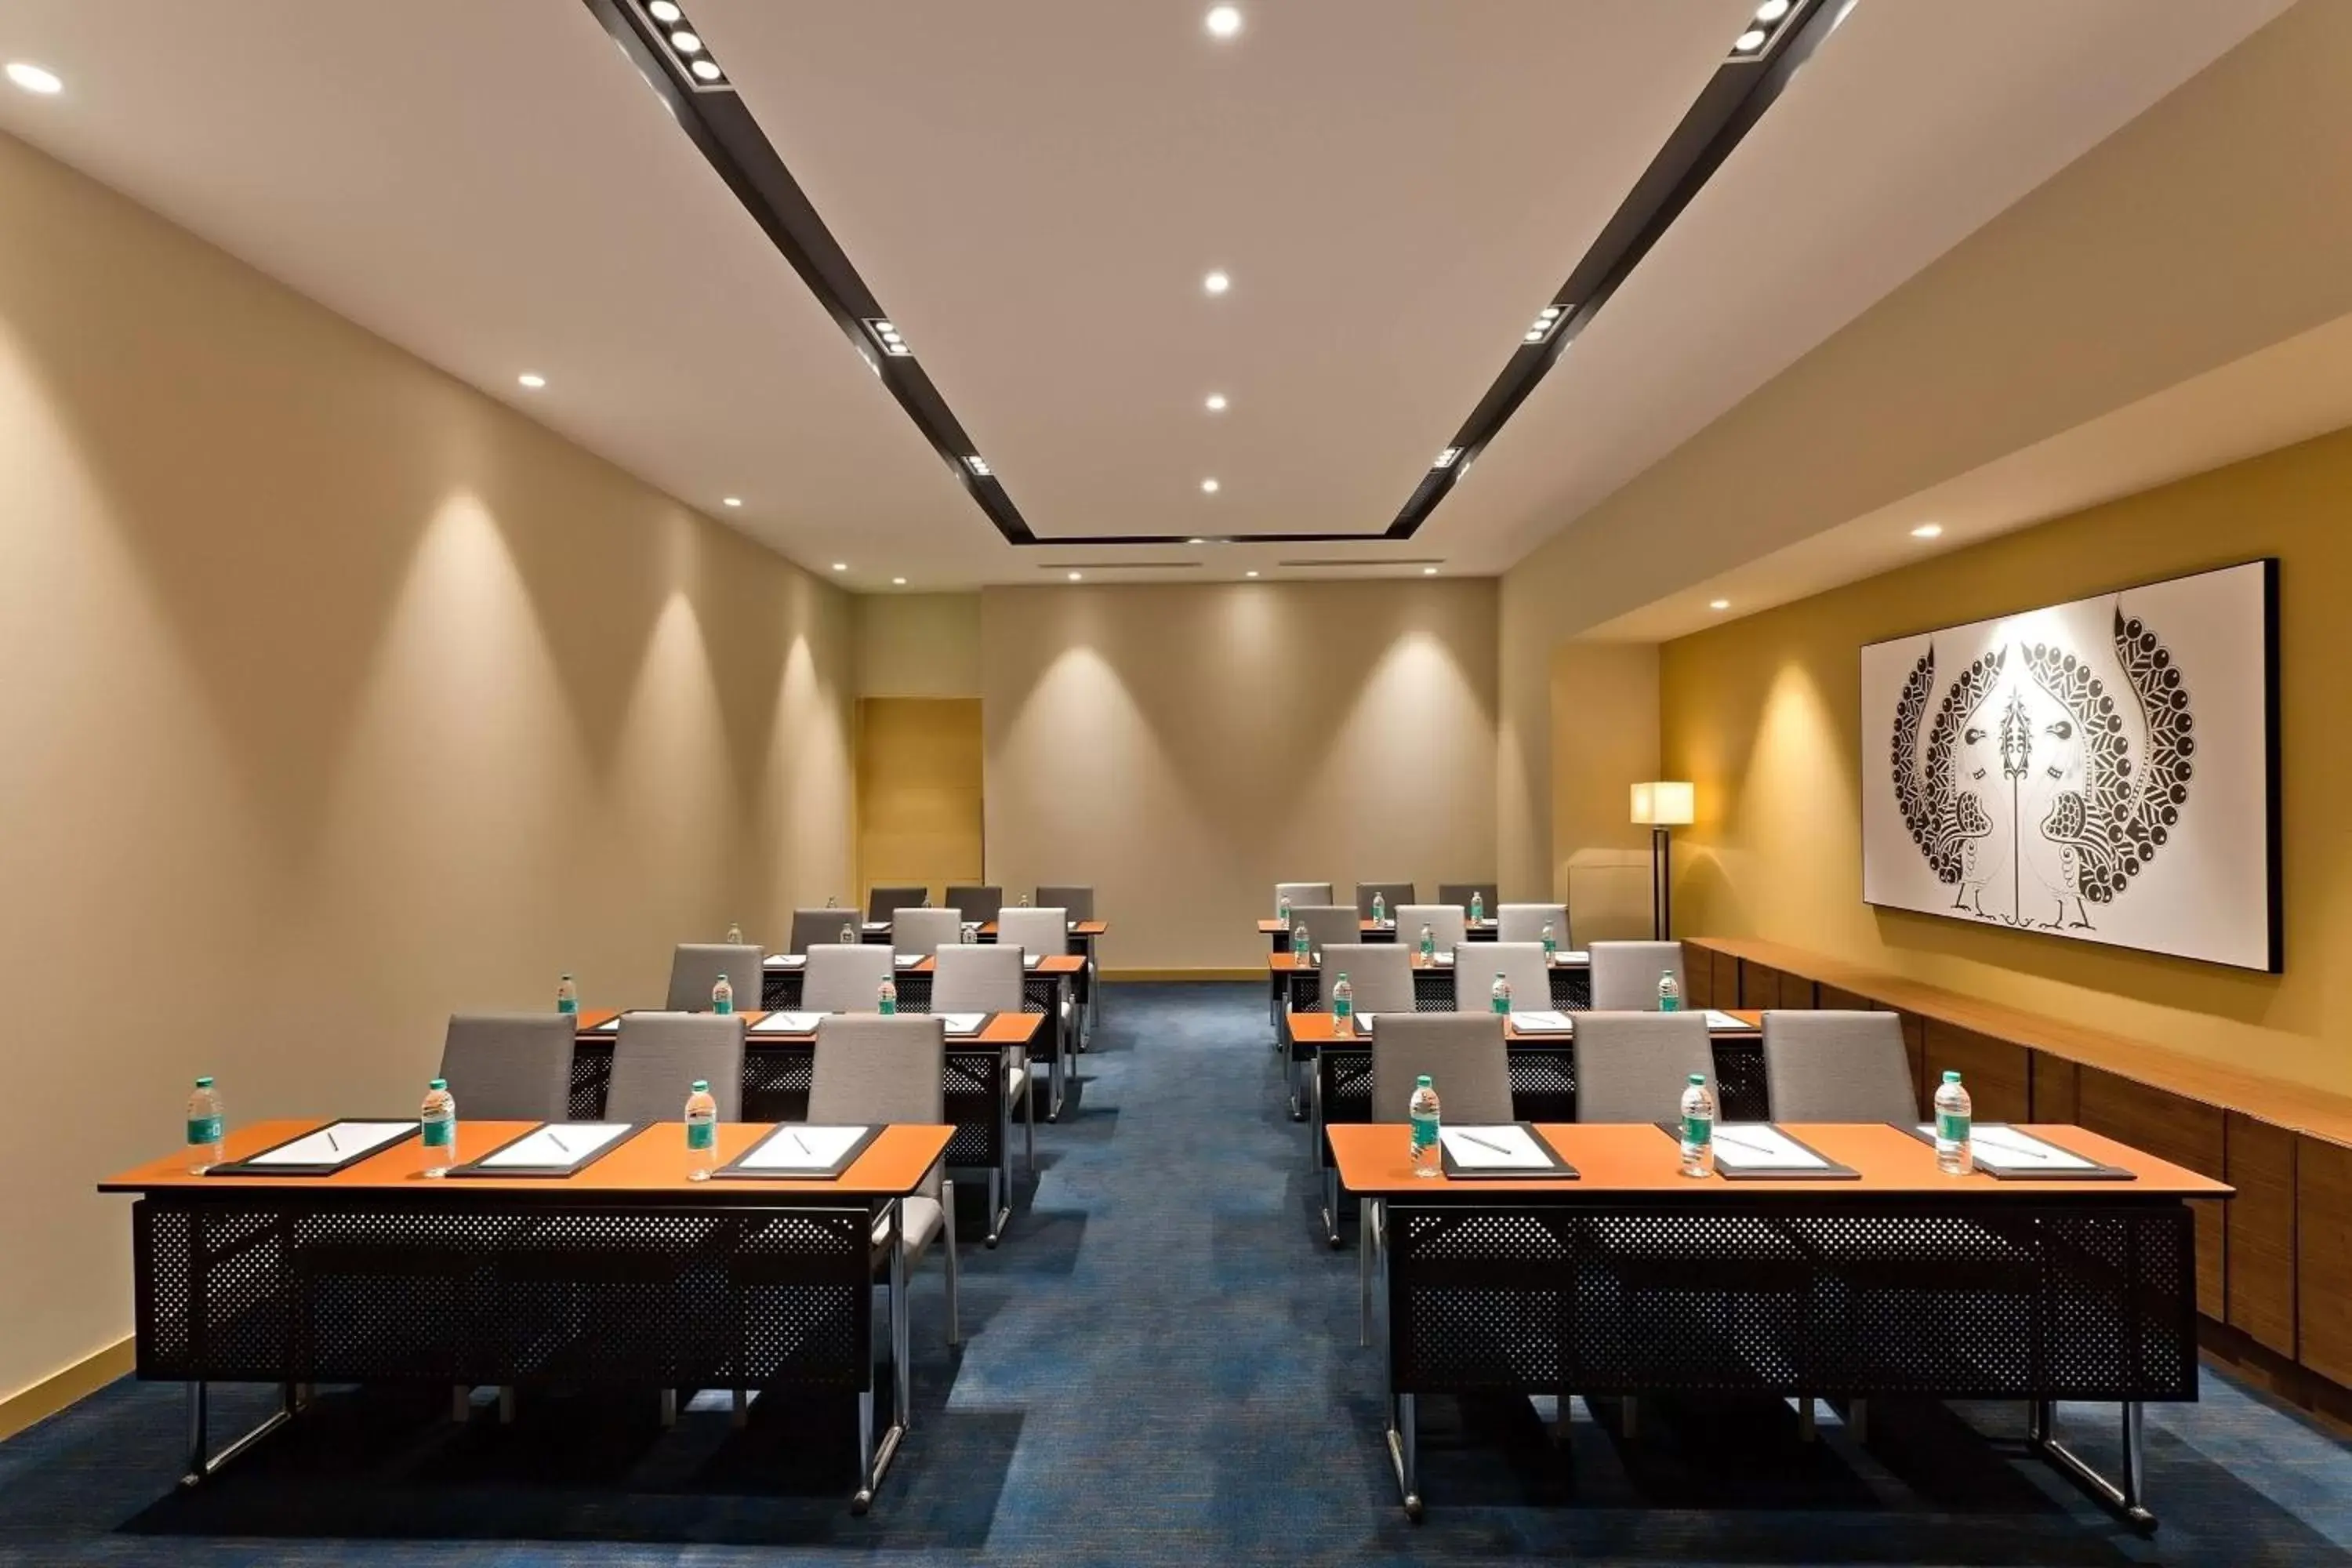 Meeting/conference room in Fairfield by Marriott Coimbatore